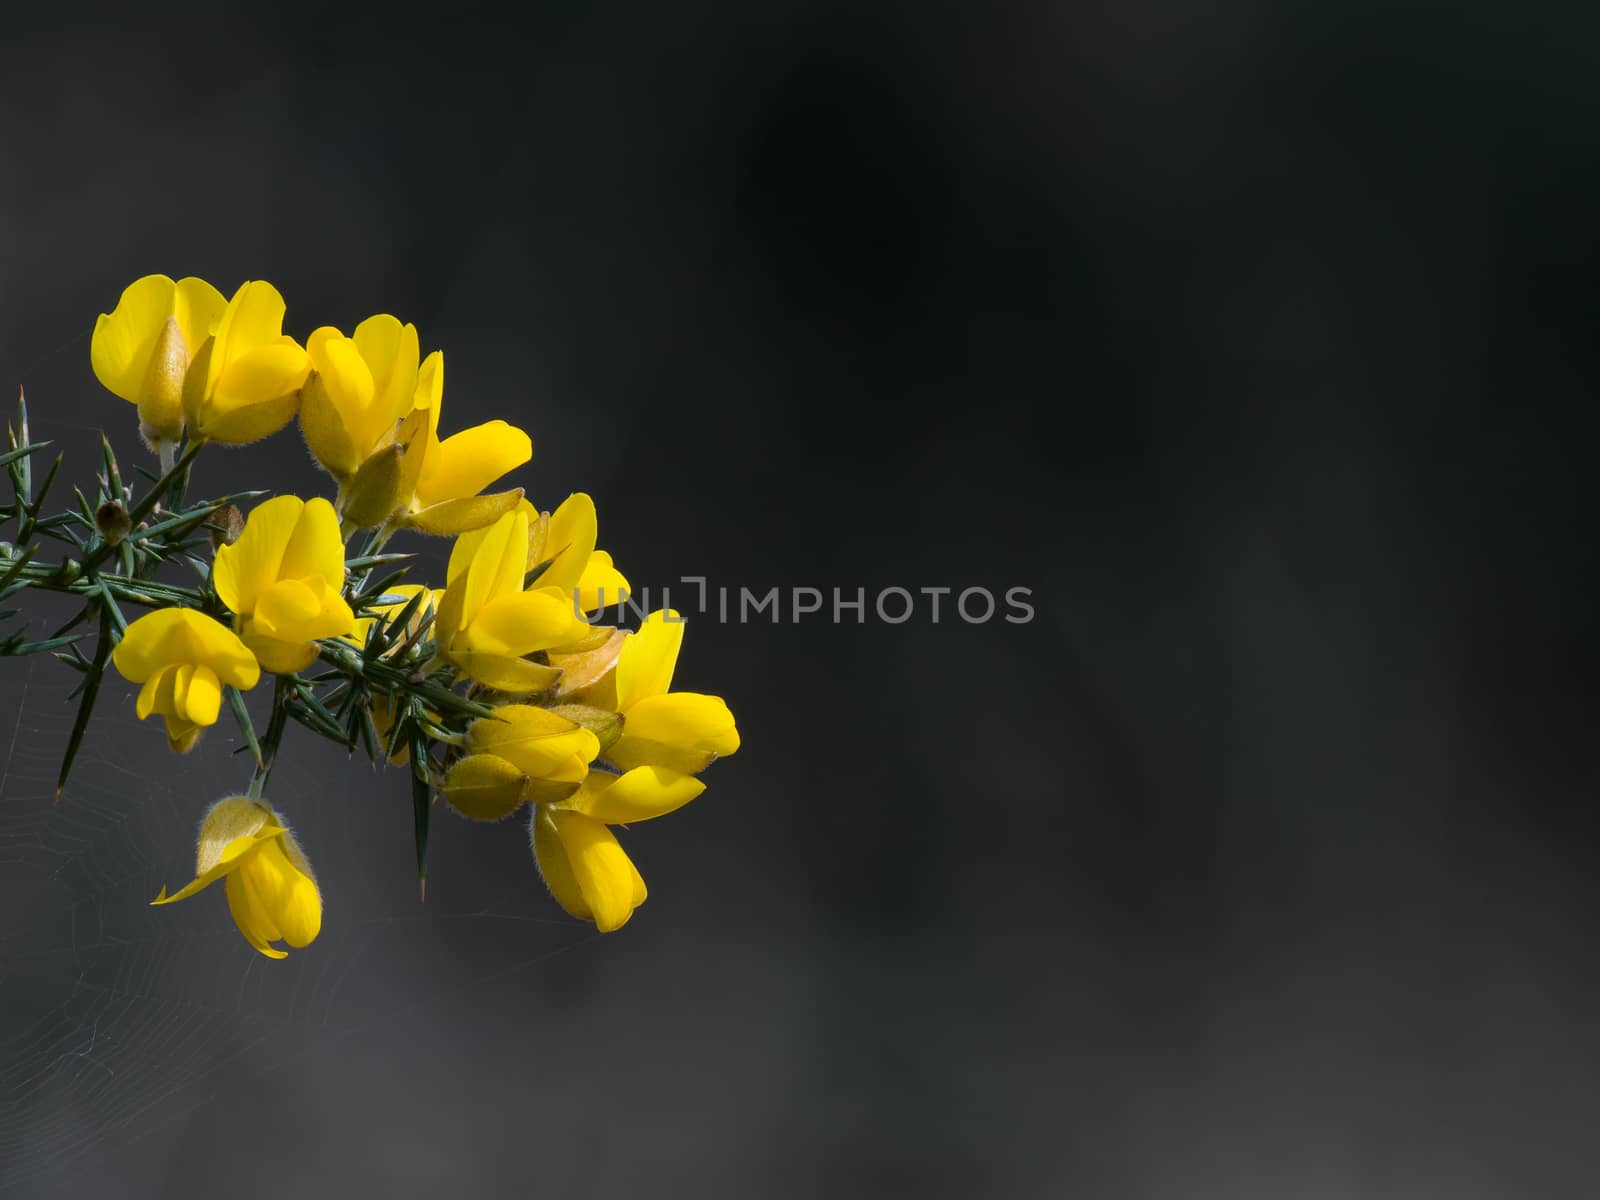 Yellow Gorse flowers with copy space for text.